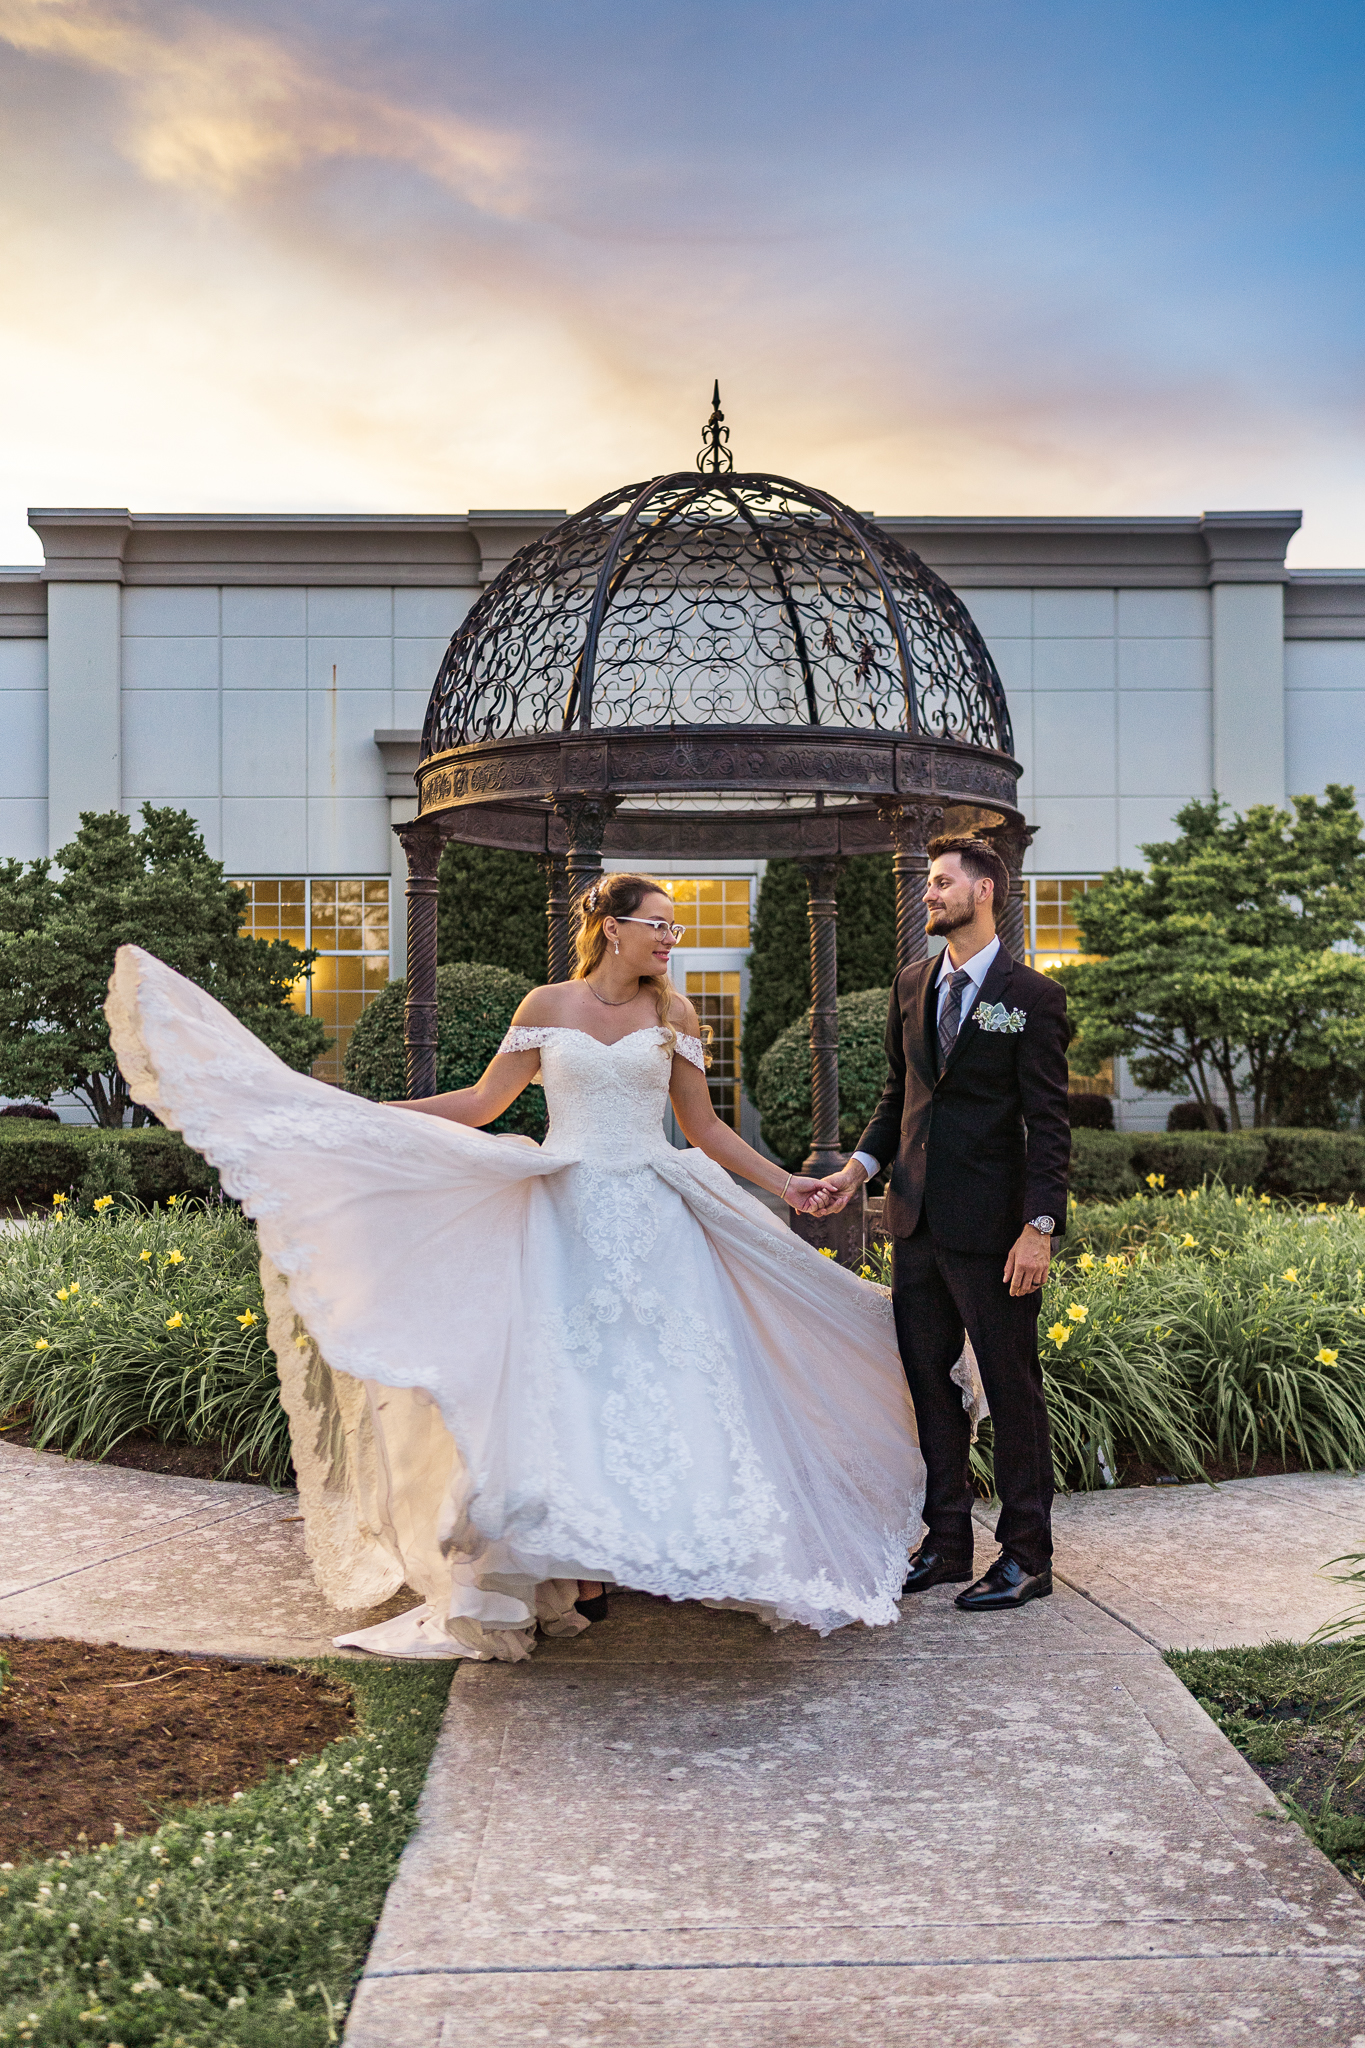 bride and groom standing in front of a gazebo Wedding Venues in Evanston